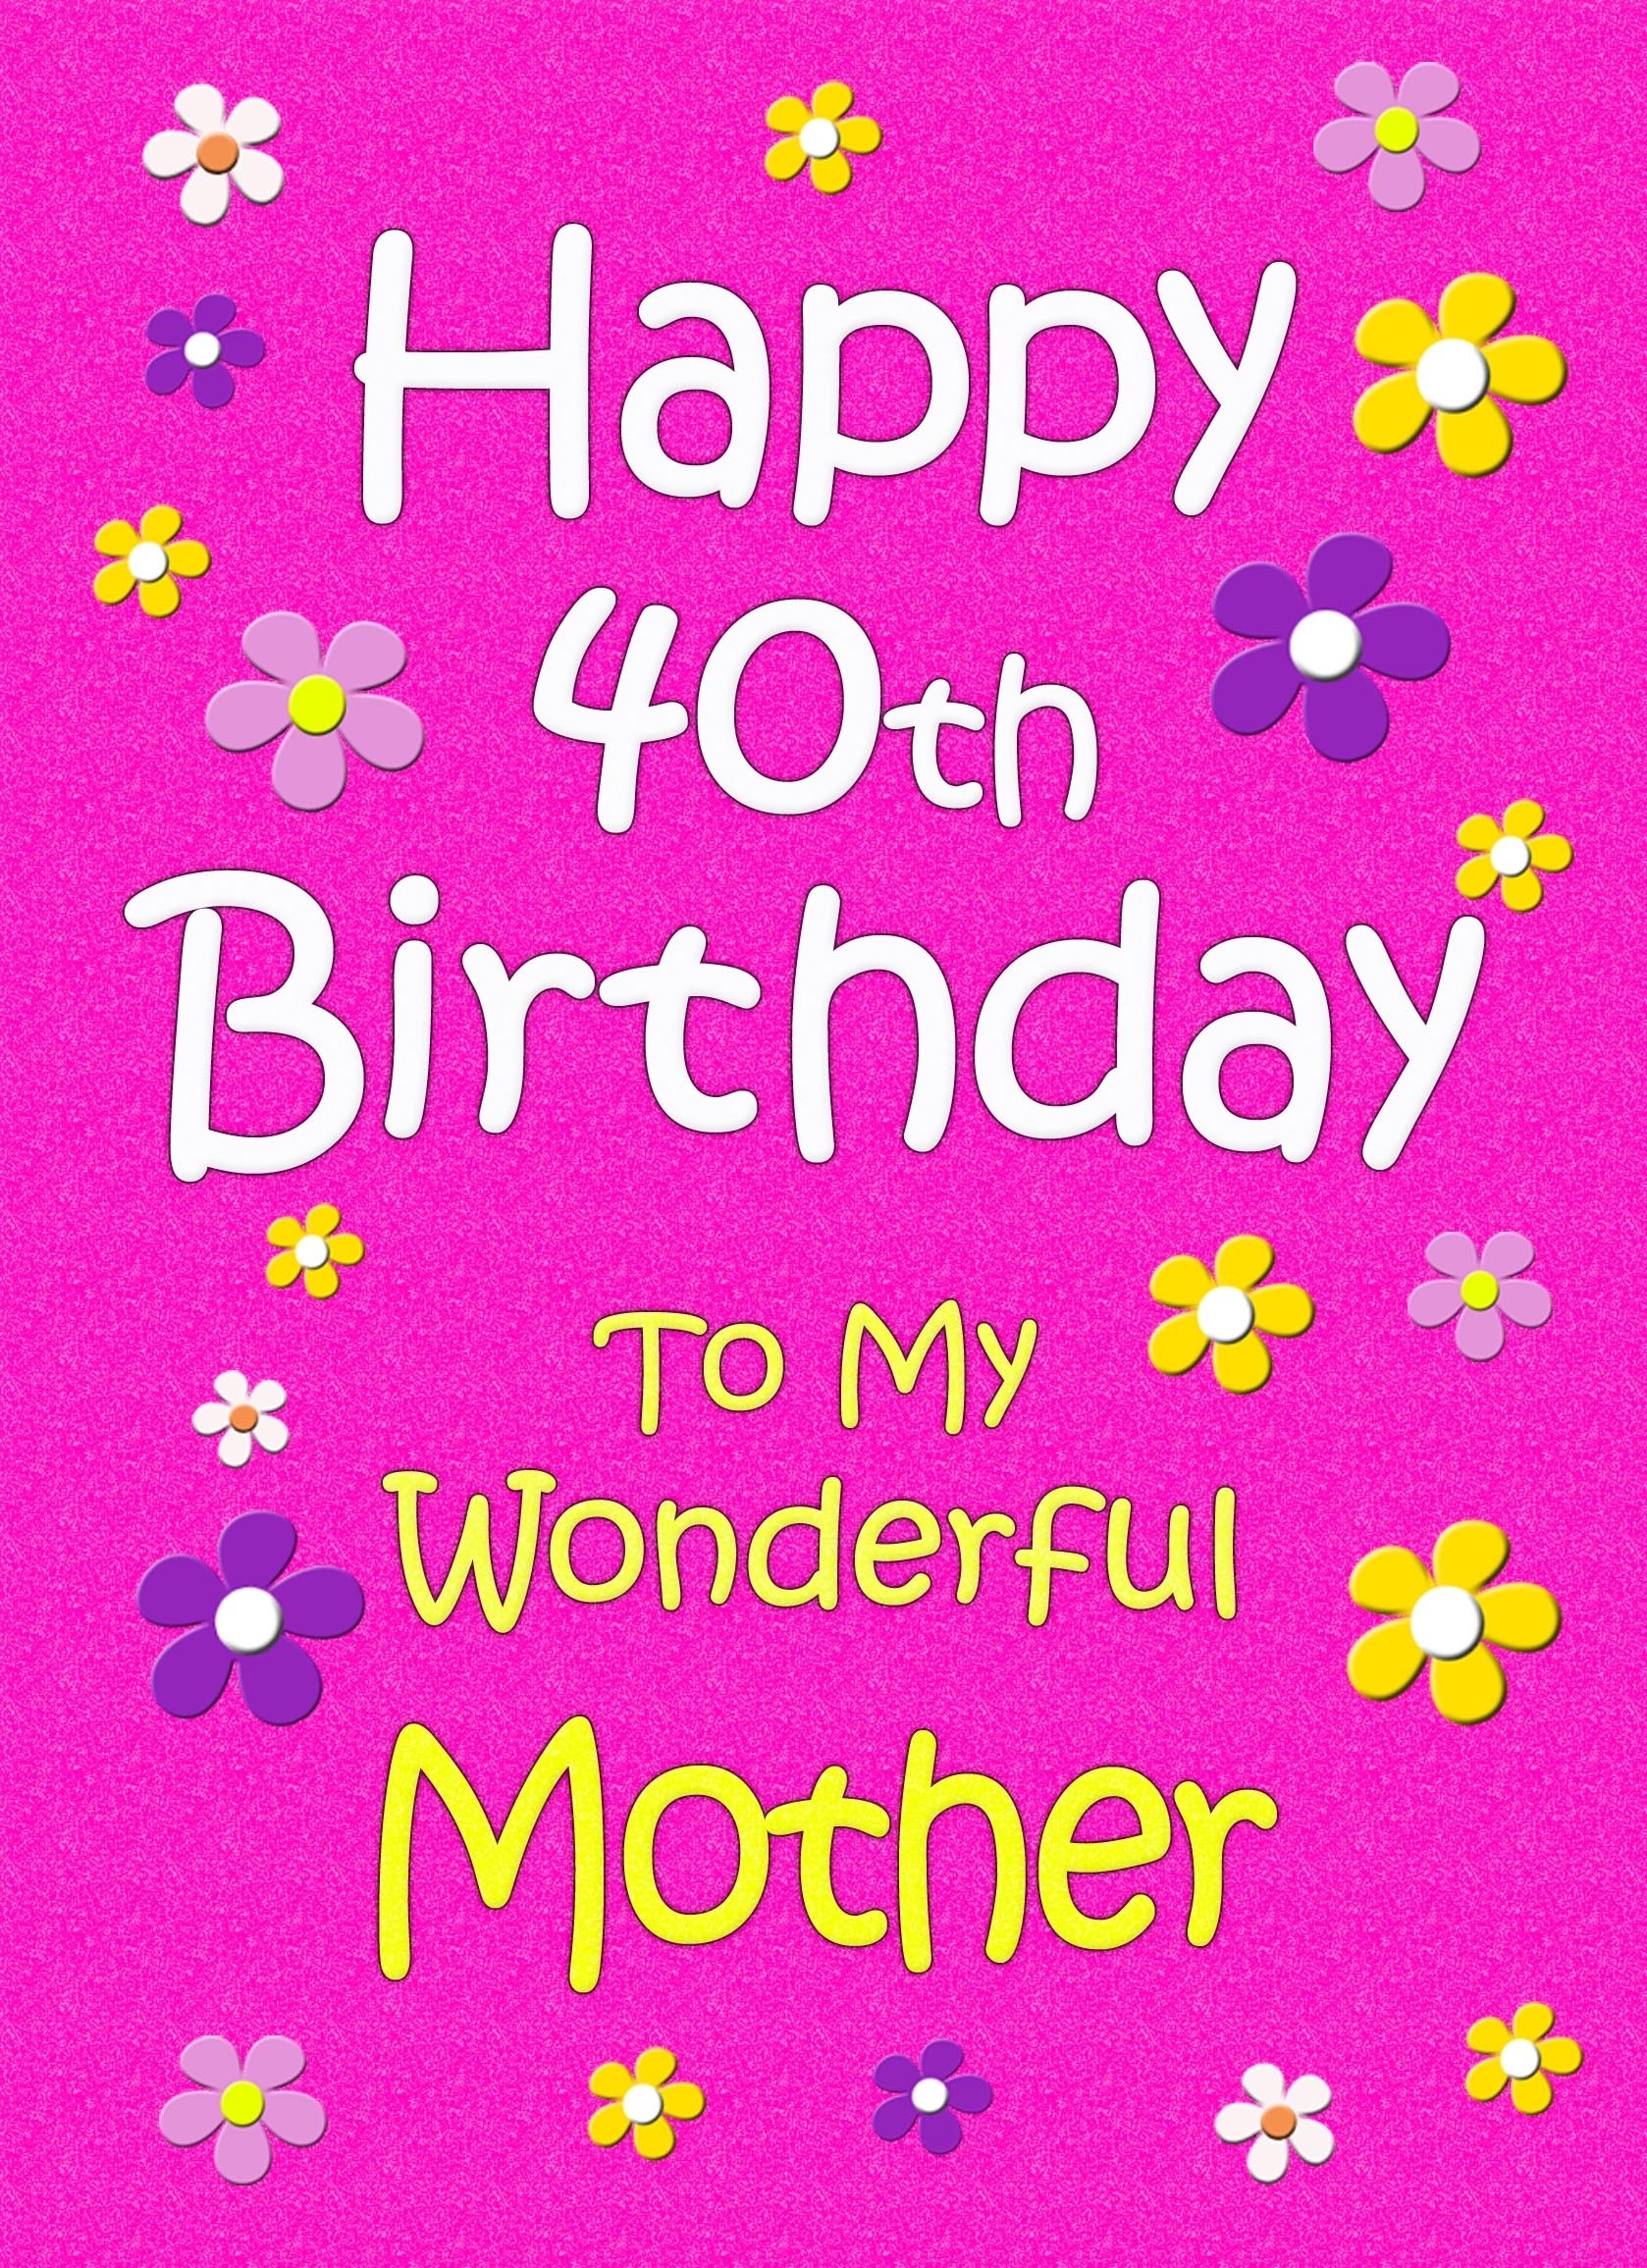 Mother 40th Birthday Card (Pink)